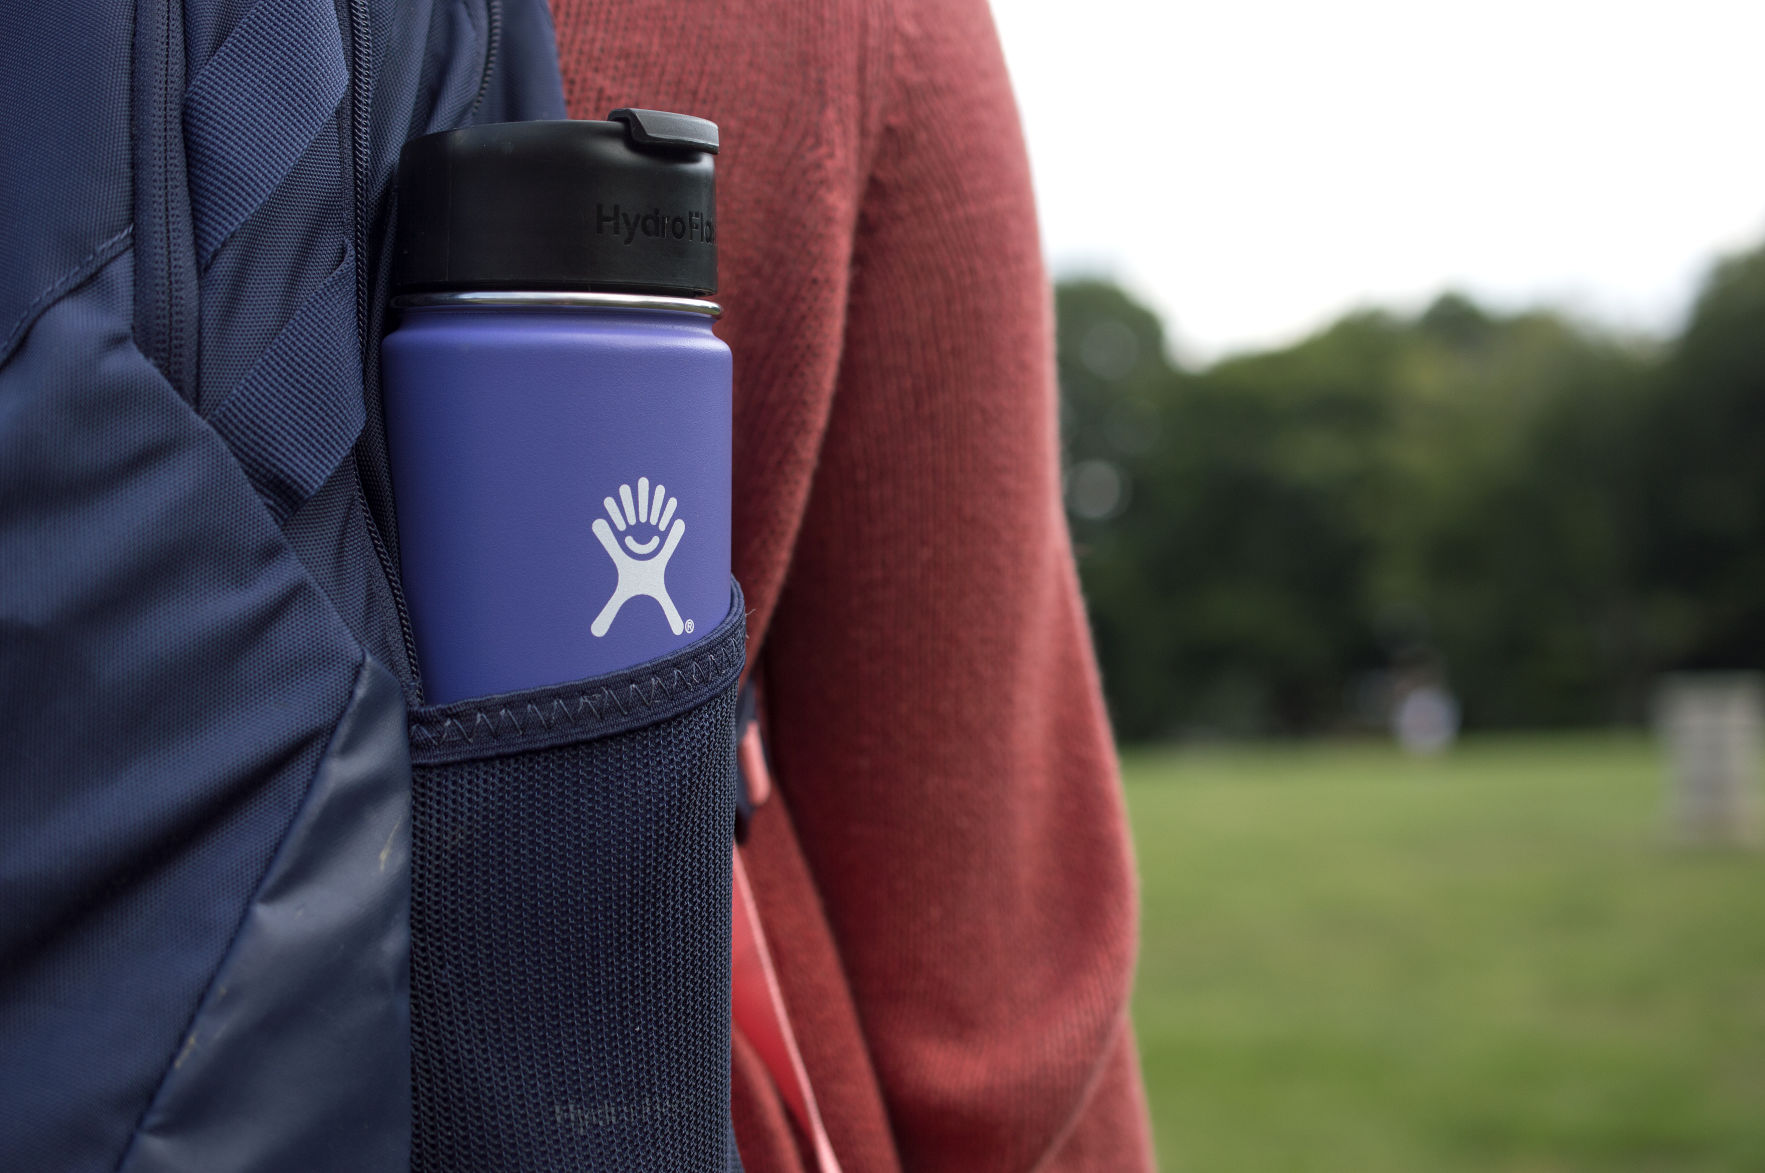 student discount hydro flask